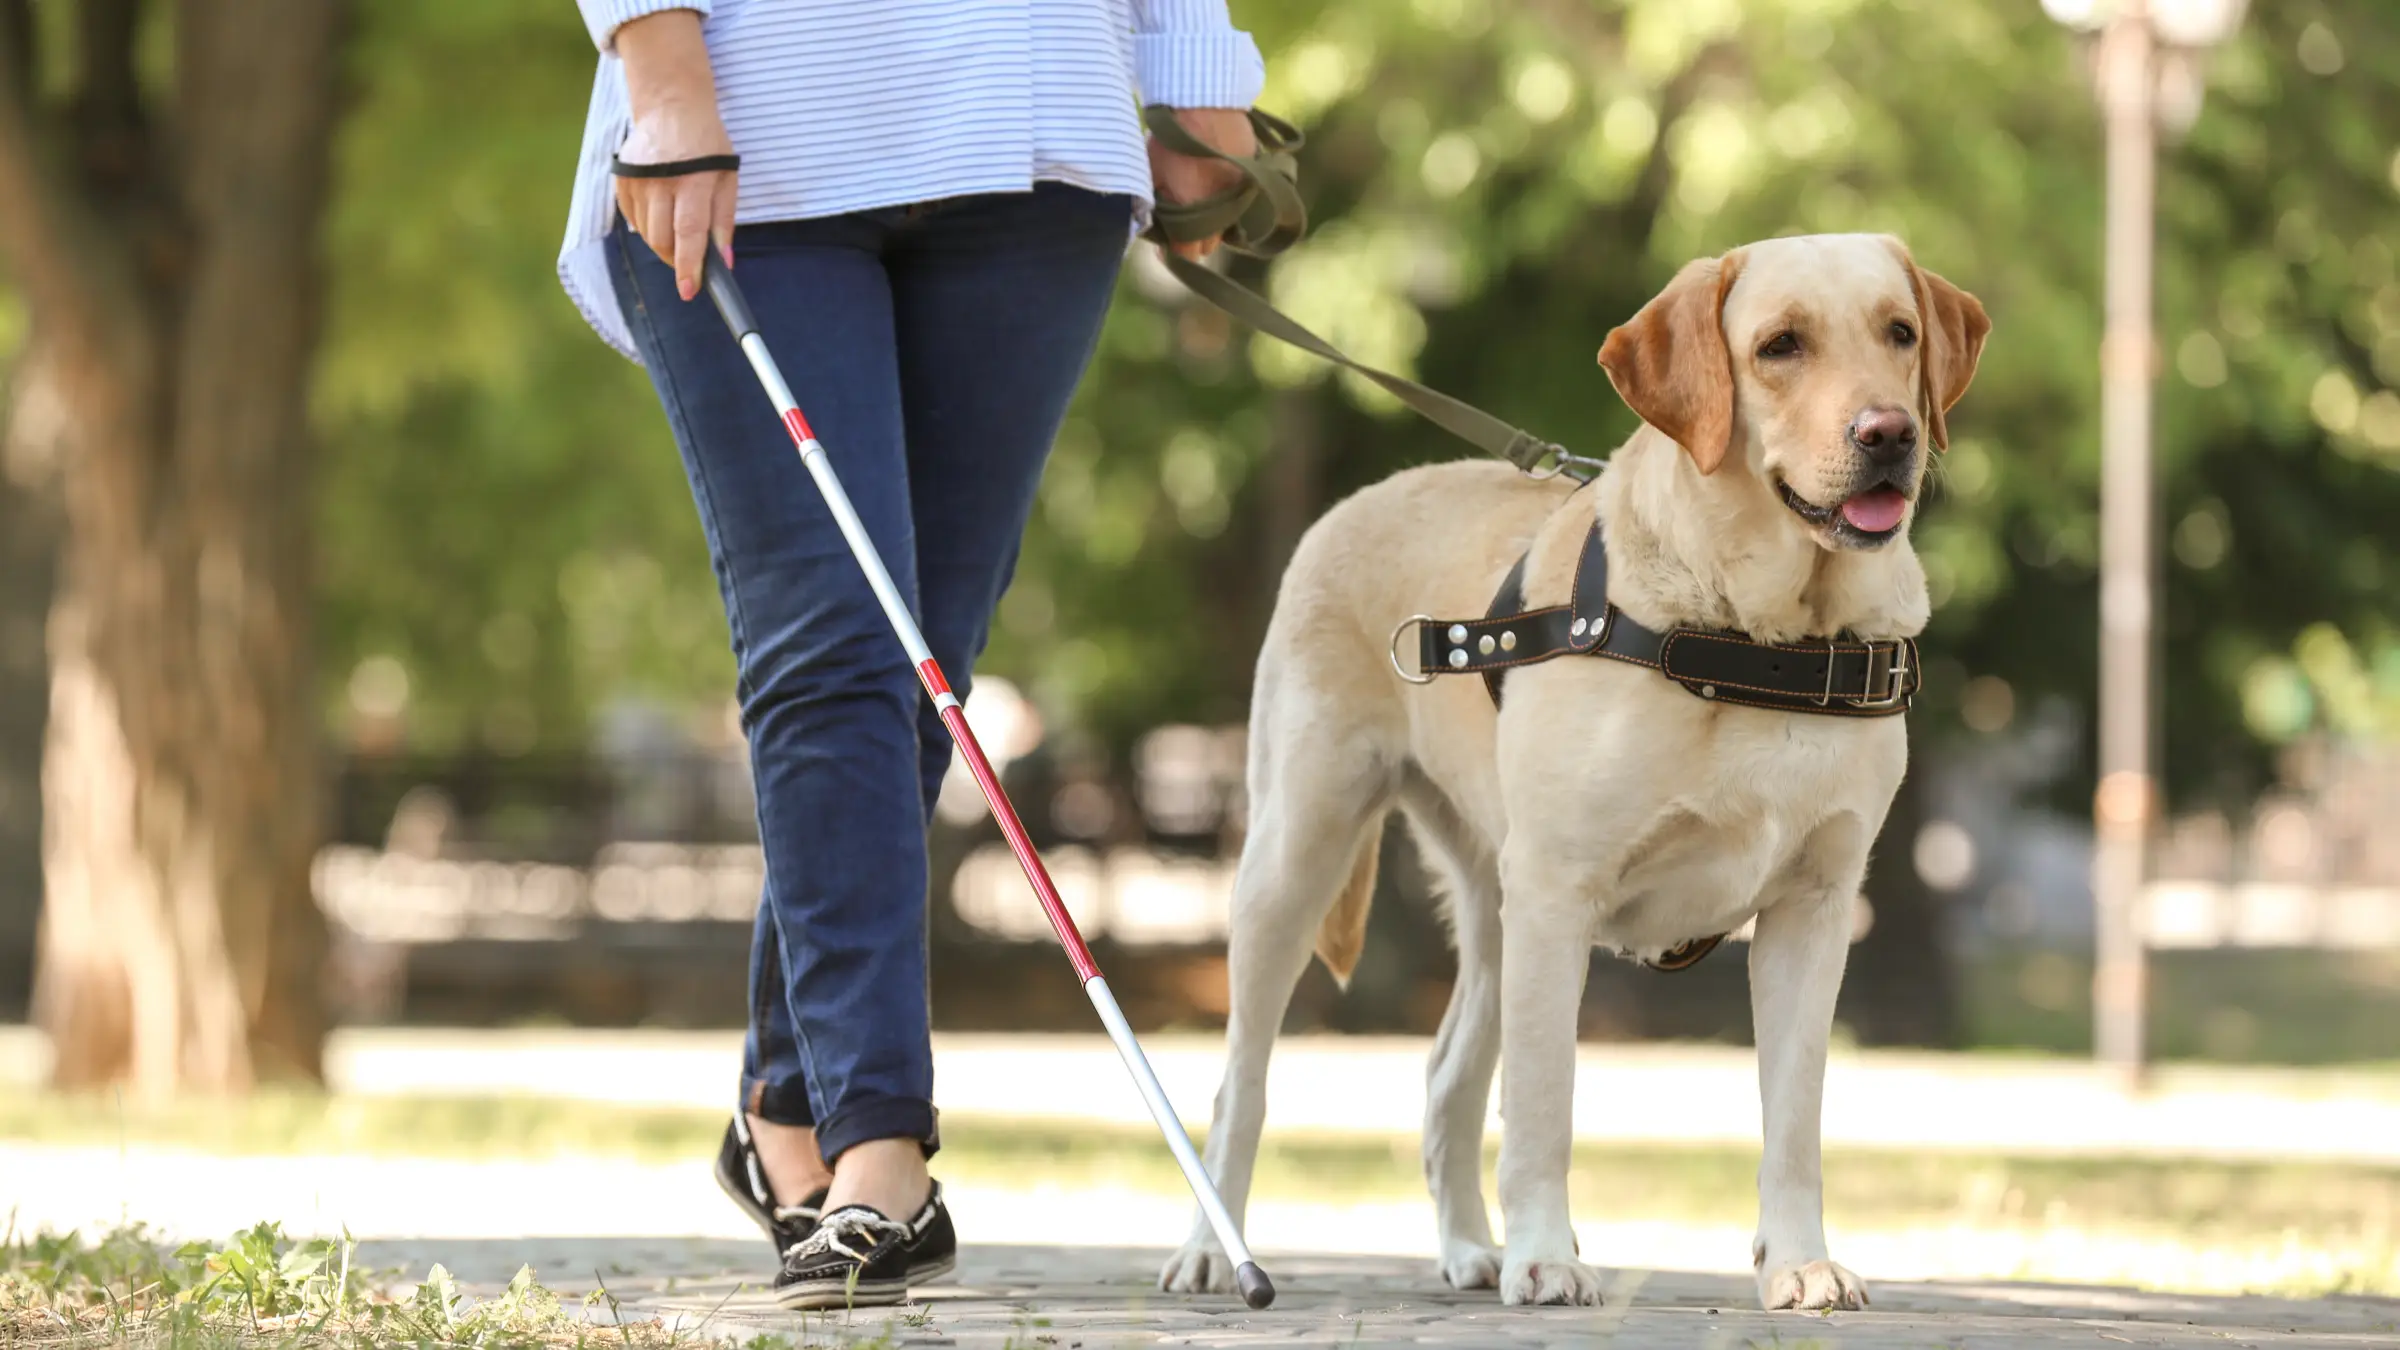 A guide dog’s advice to the public